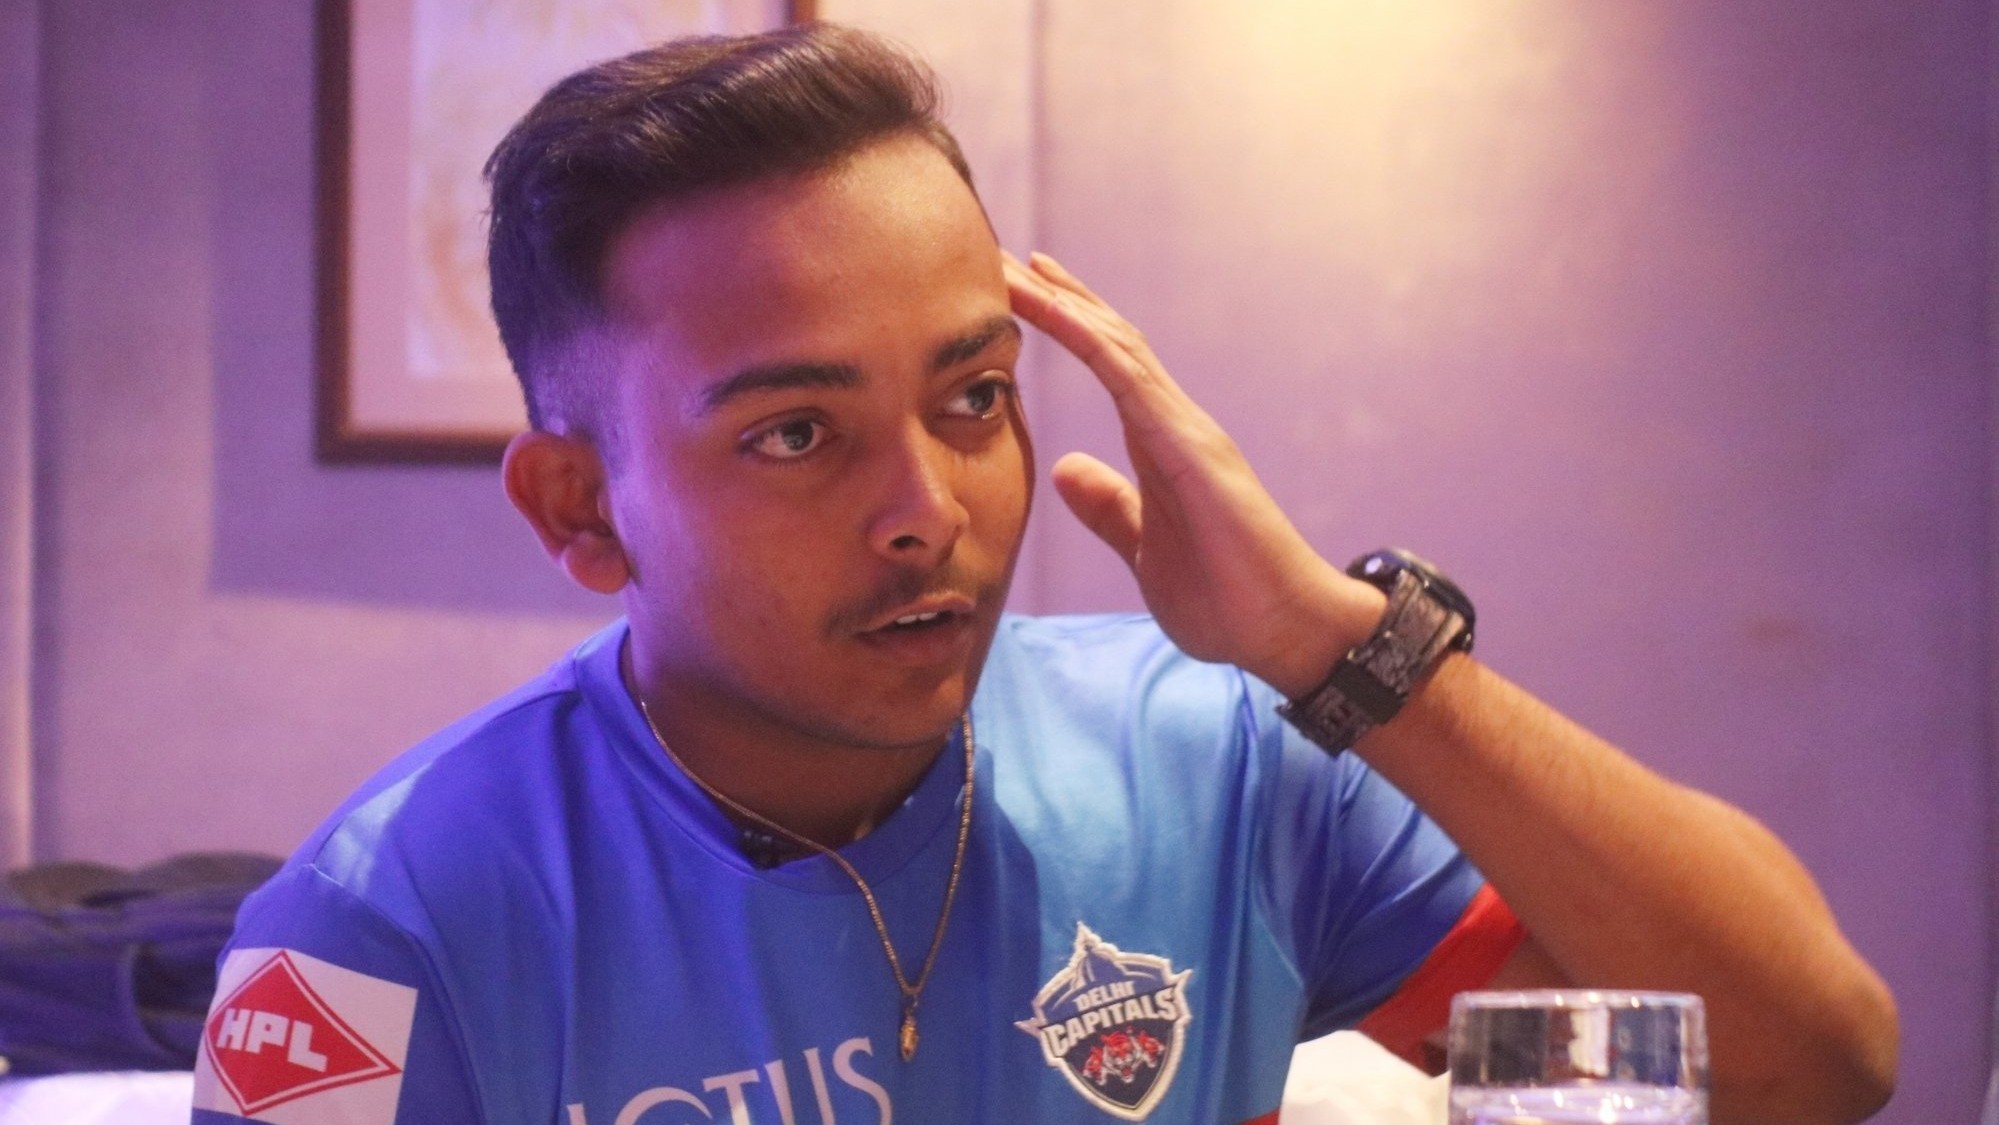 IPL 2020: Prithvi Shaw focusing on making the most out of the training sessions